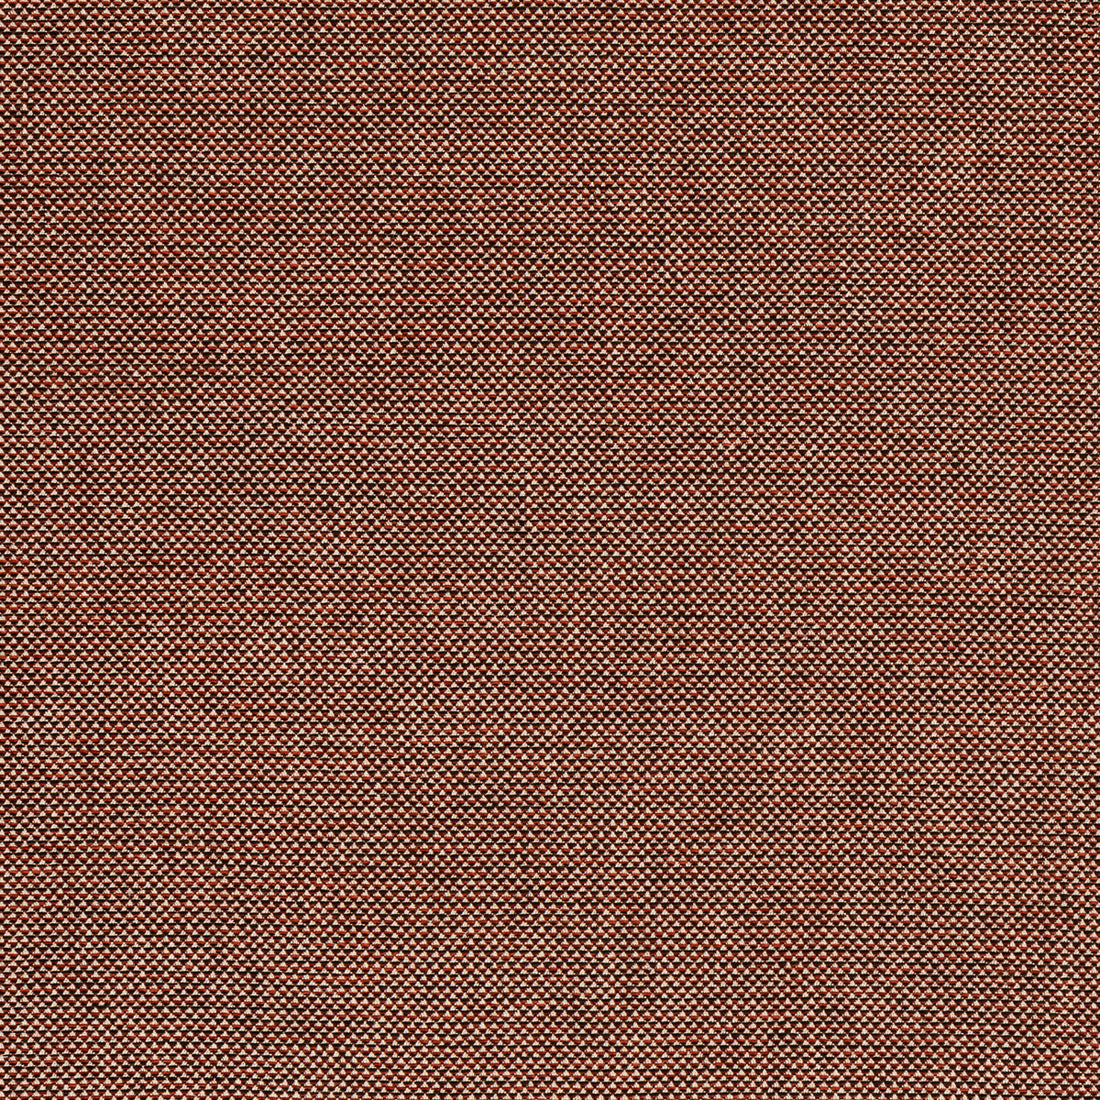 Webster fabric in russet color - pattern BFC-3713.924.0 - by Lee Jofa in the Blithfield Eden collection